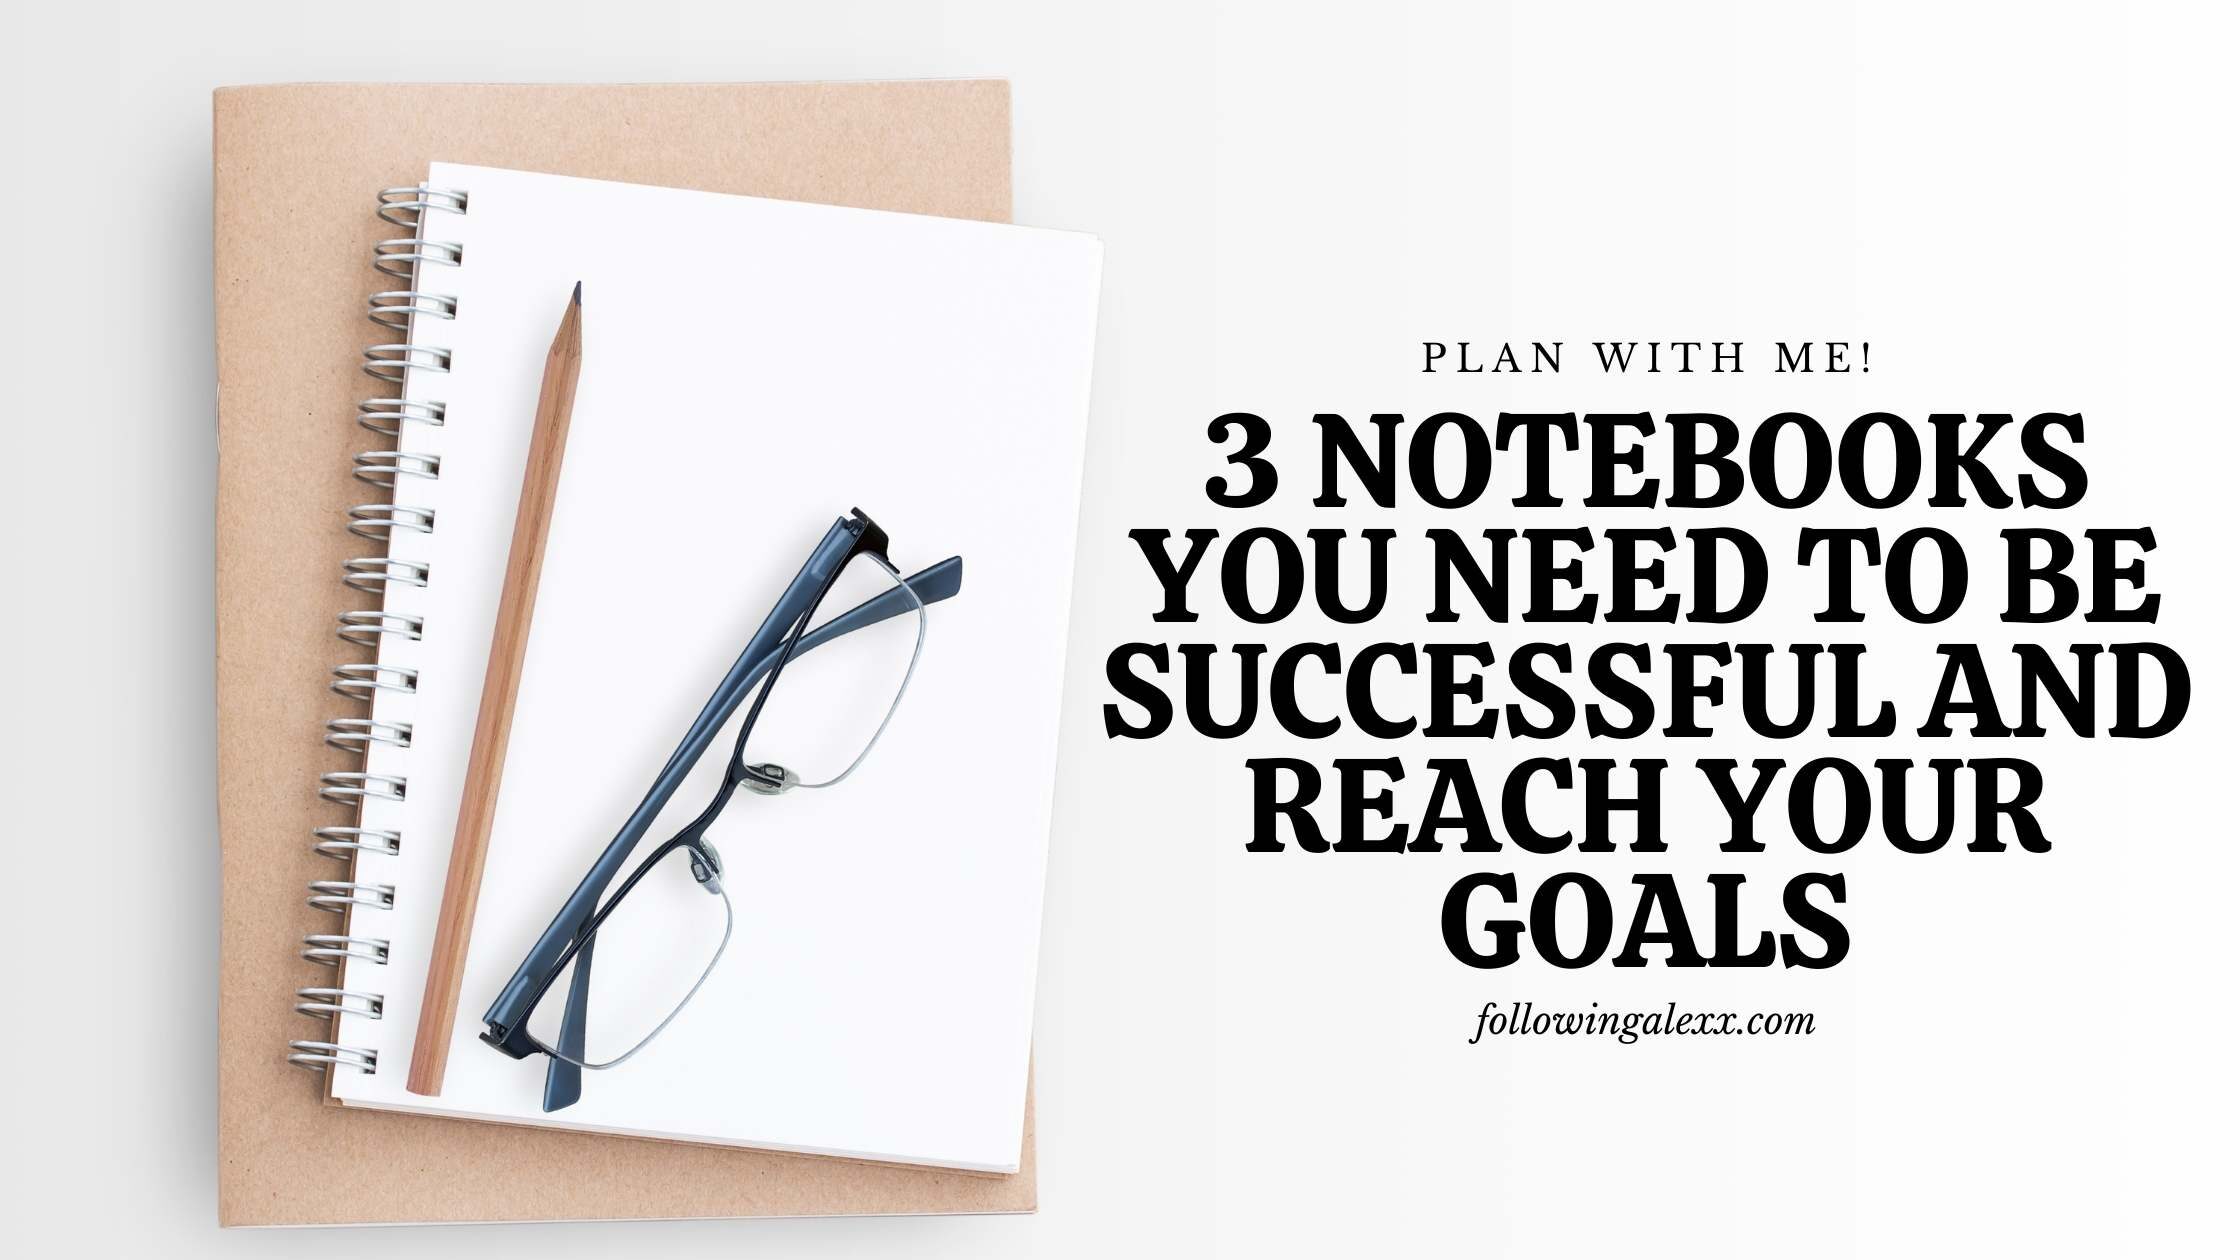 3 notebooks you need to be successful and reach your goals